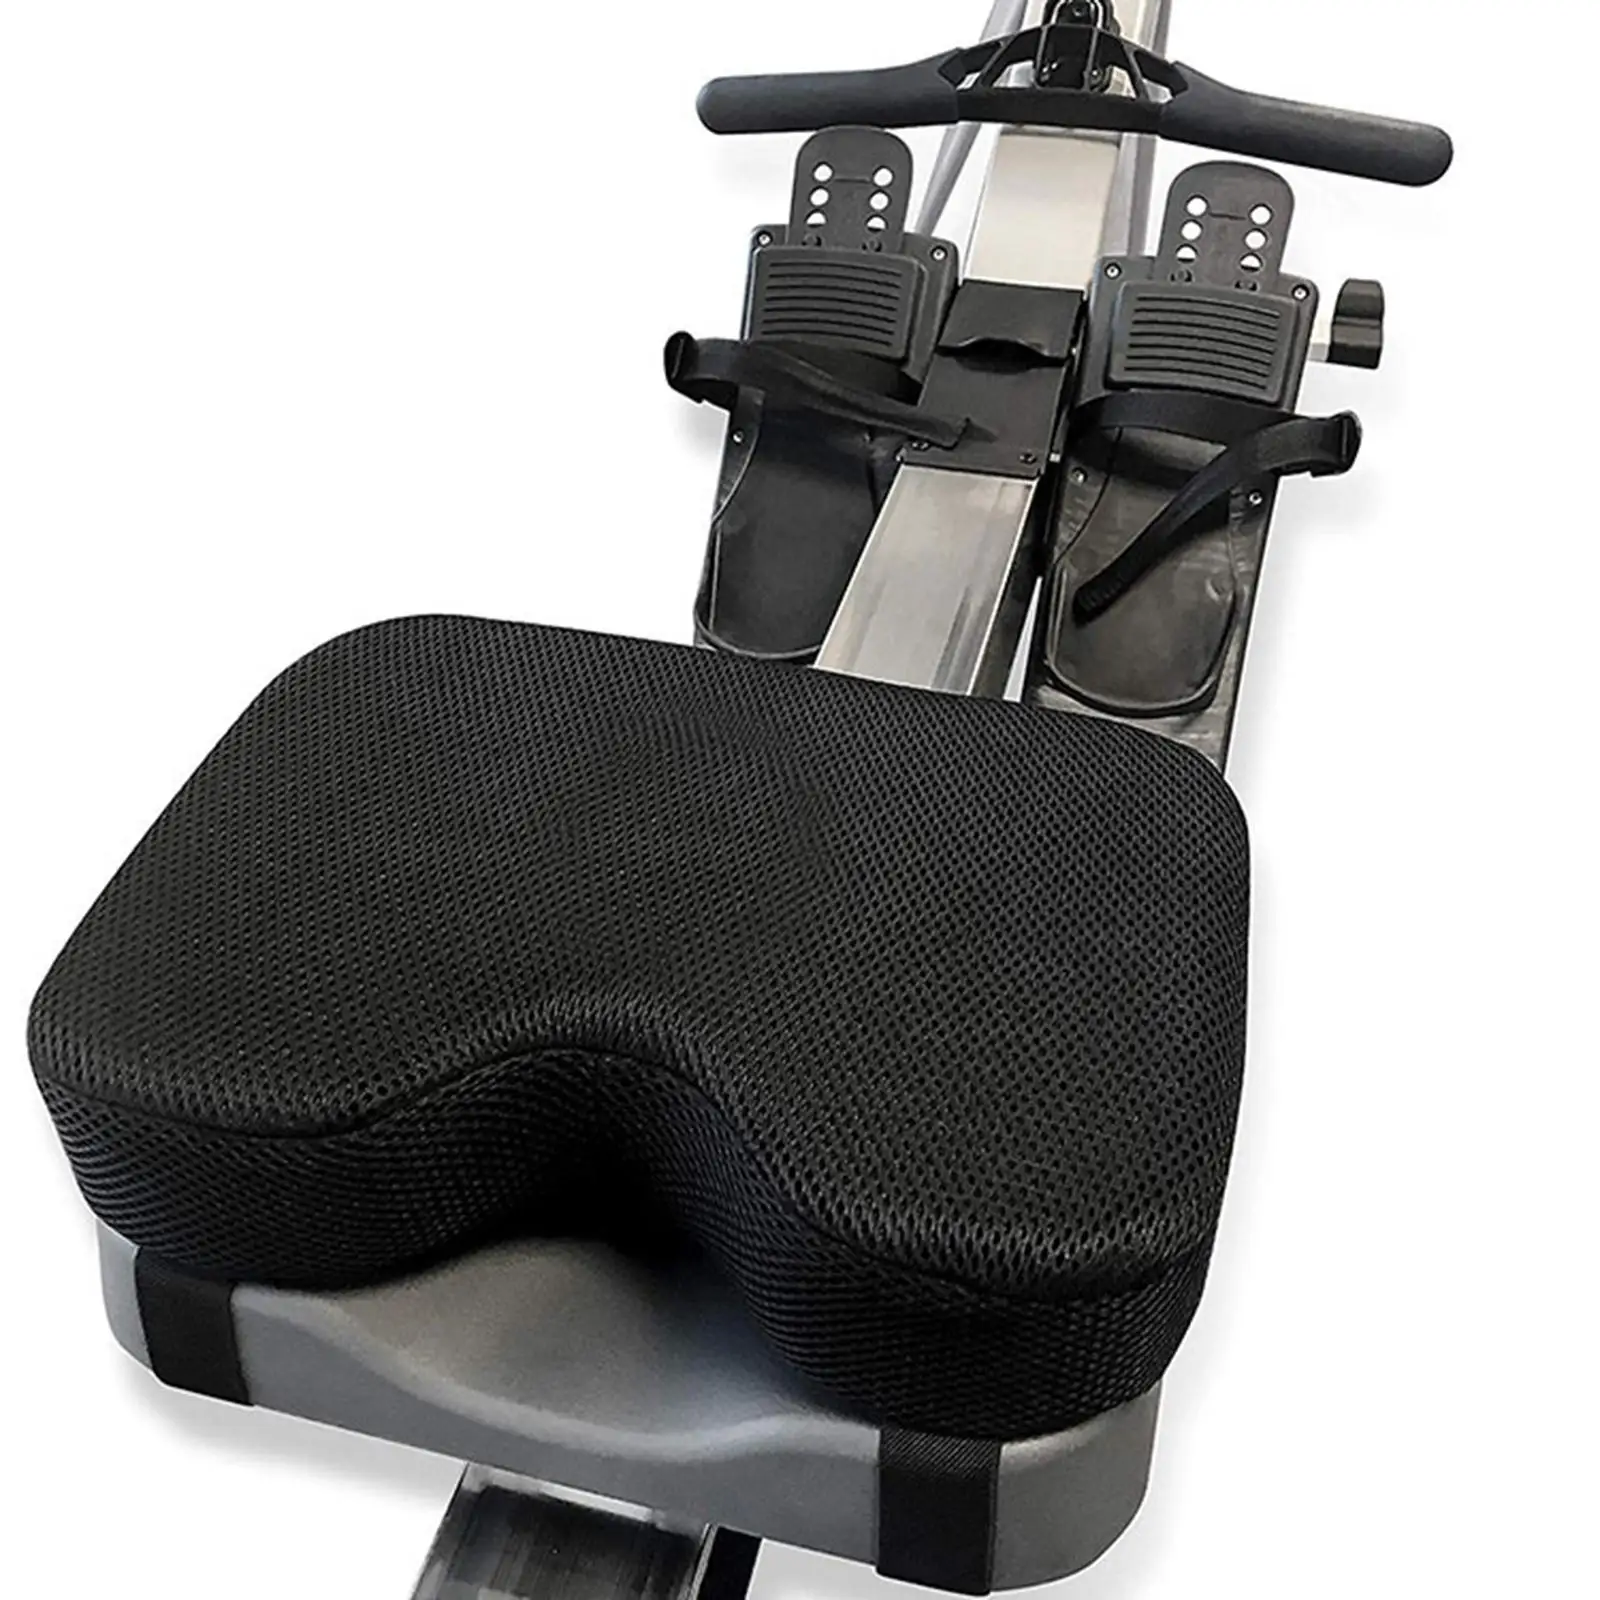 Portable Rowing Machine Seat Cushion Pad Comfortable for Indoor Athlete